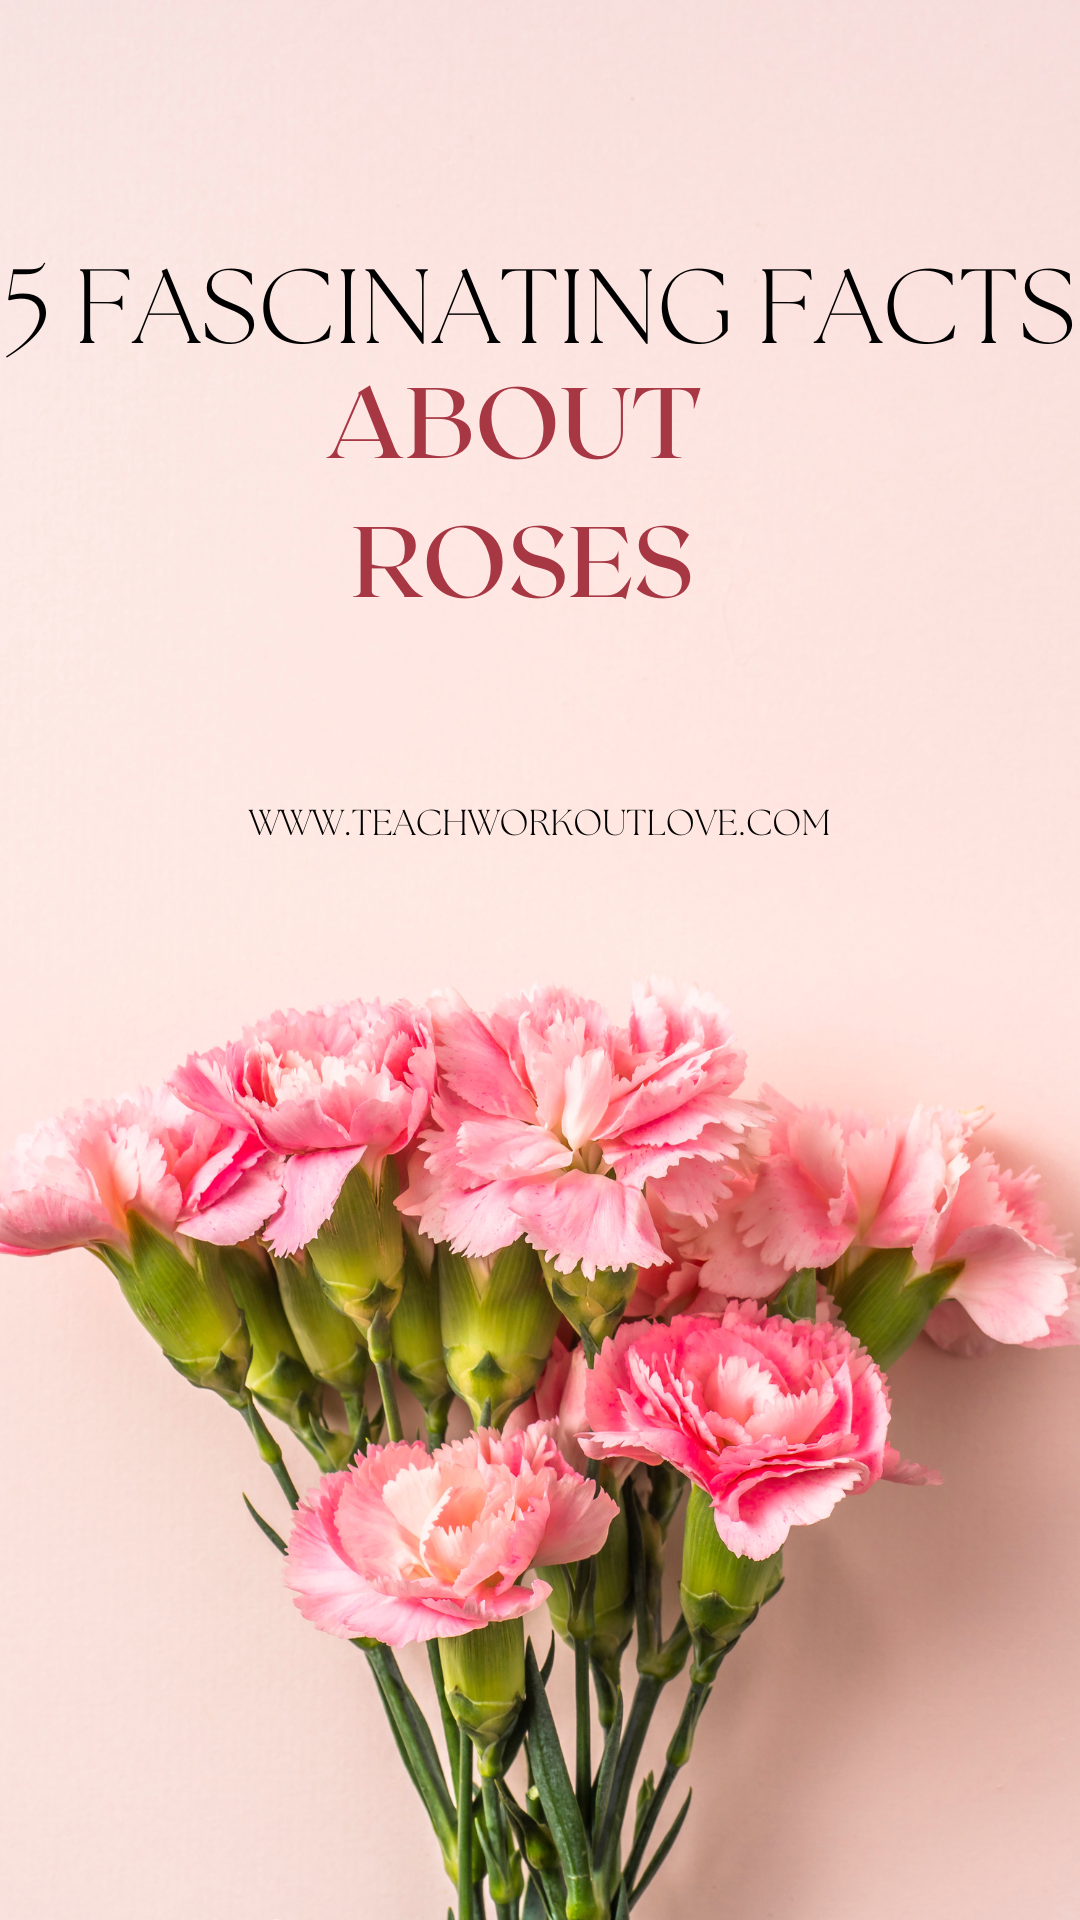 Valentine's Day is coming up and it's important to know some details about flowers. Here are some incredible facts about roses that you may not have heard.